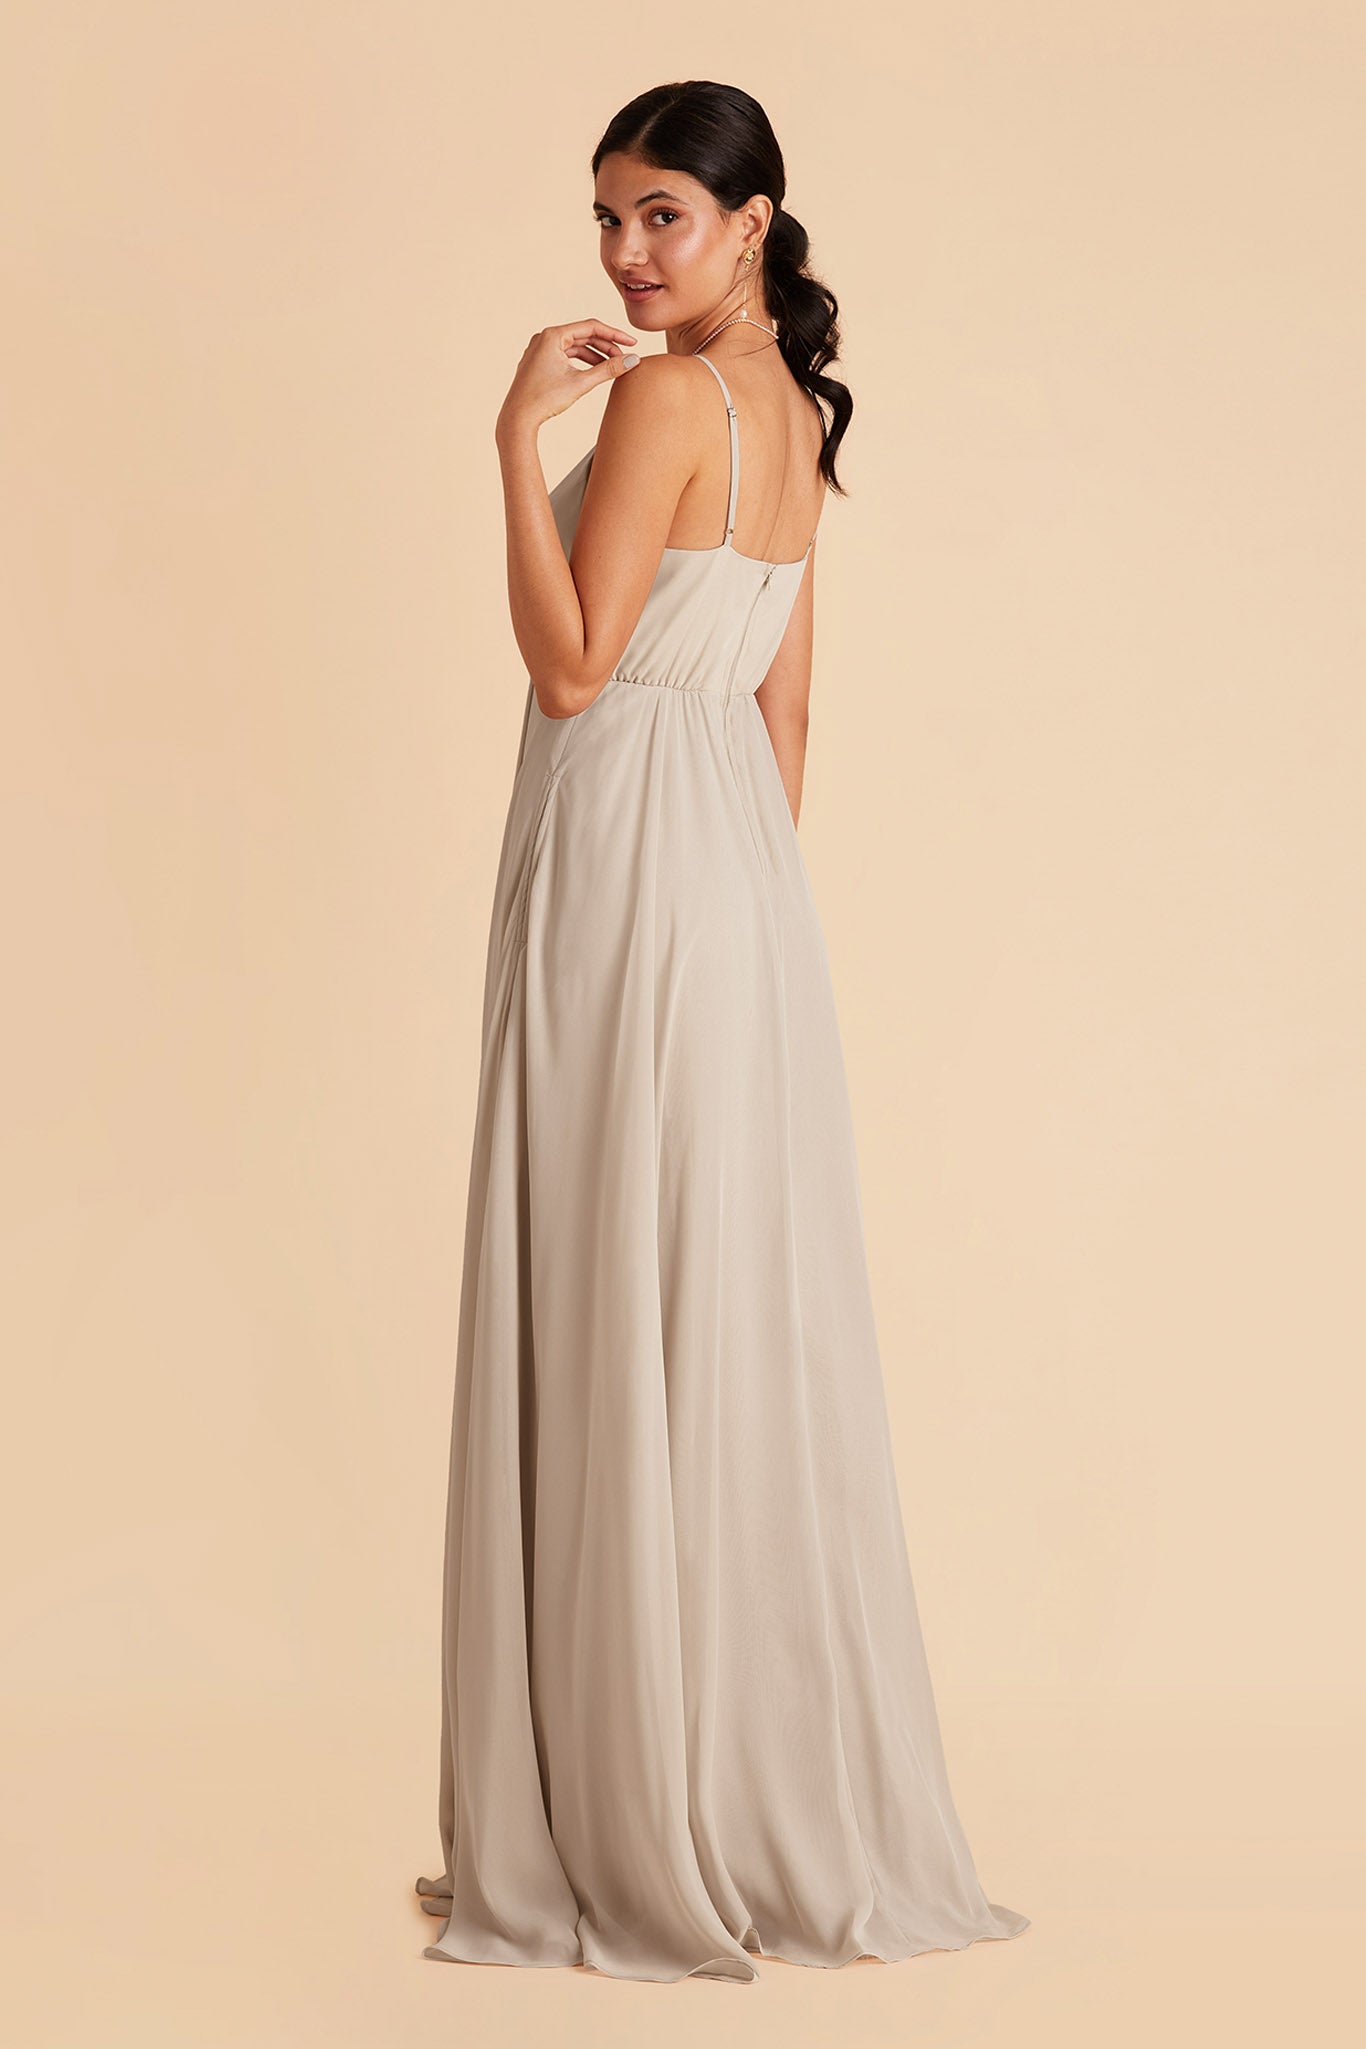 Kaia bridesmaids dress in neutral champagne chiffon by Birdy Grey, side view